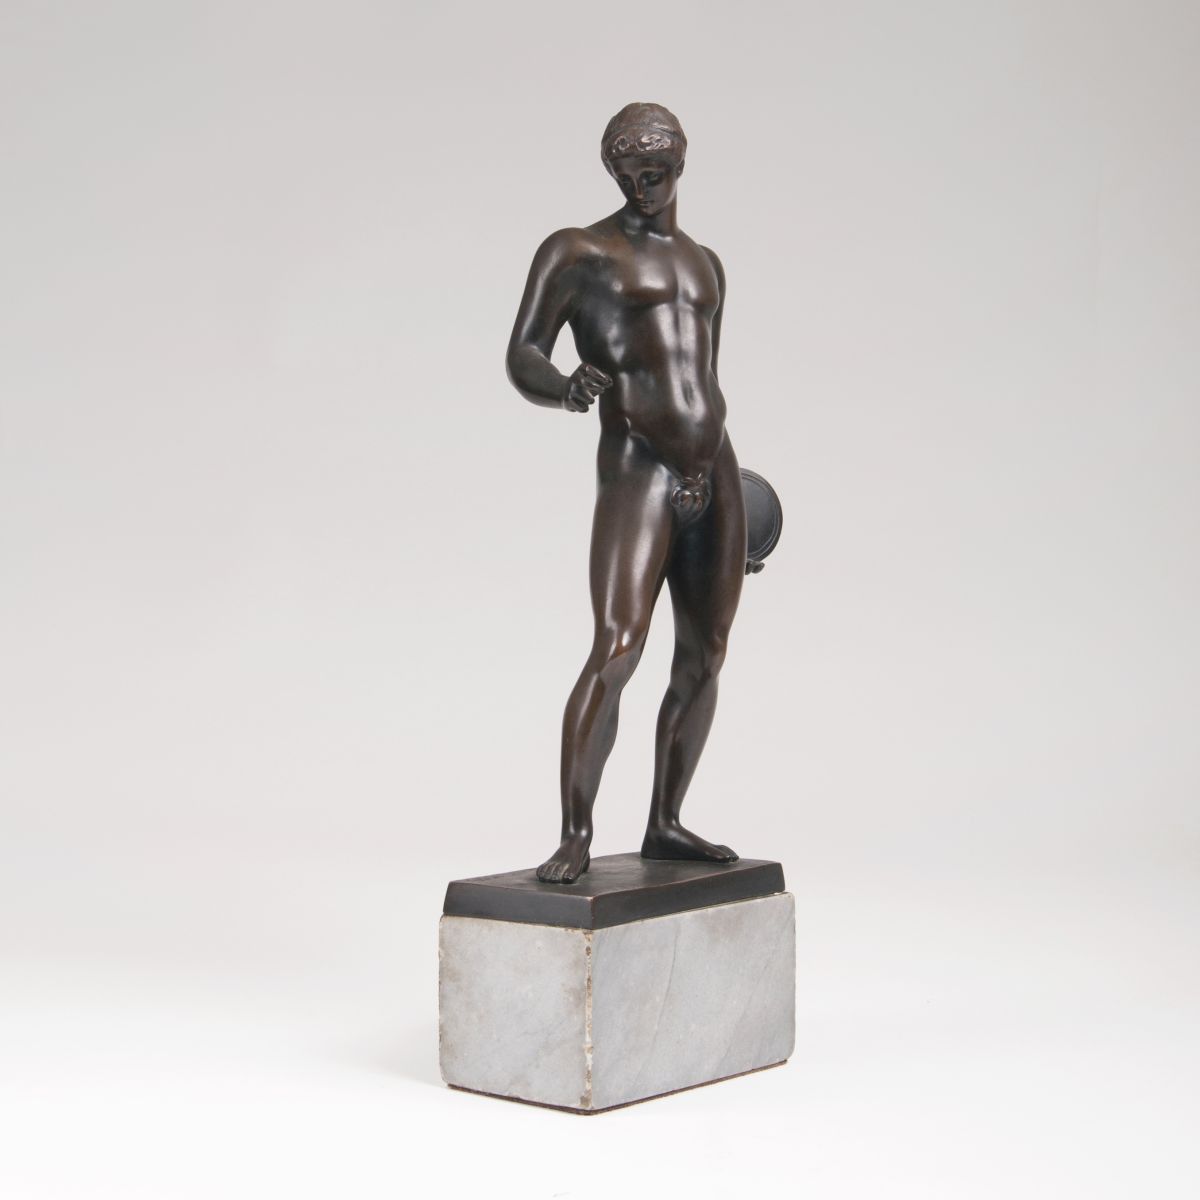 A bronze sculpture 'Discus thrower of Myron' after the antique model